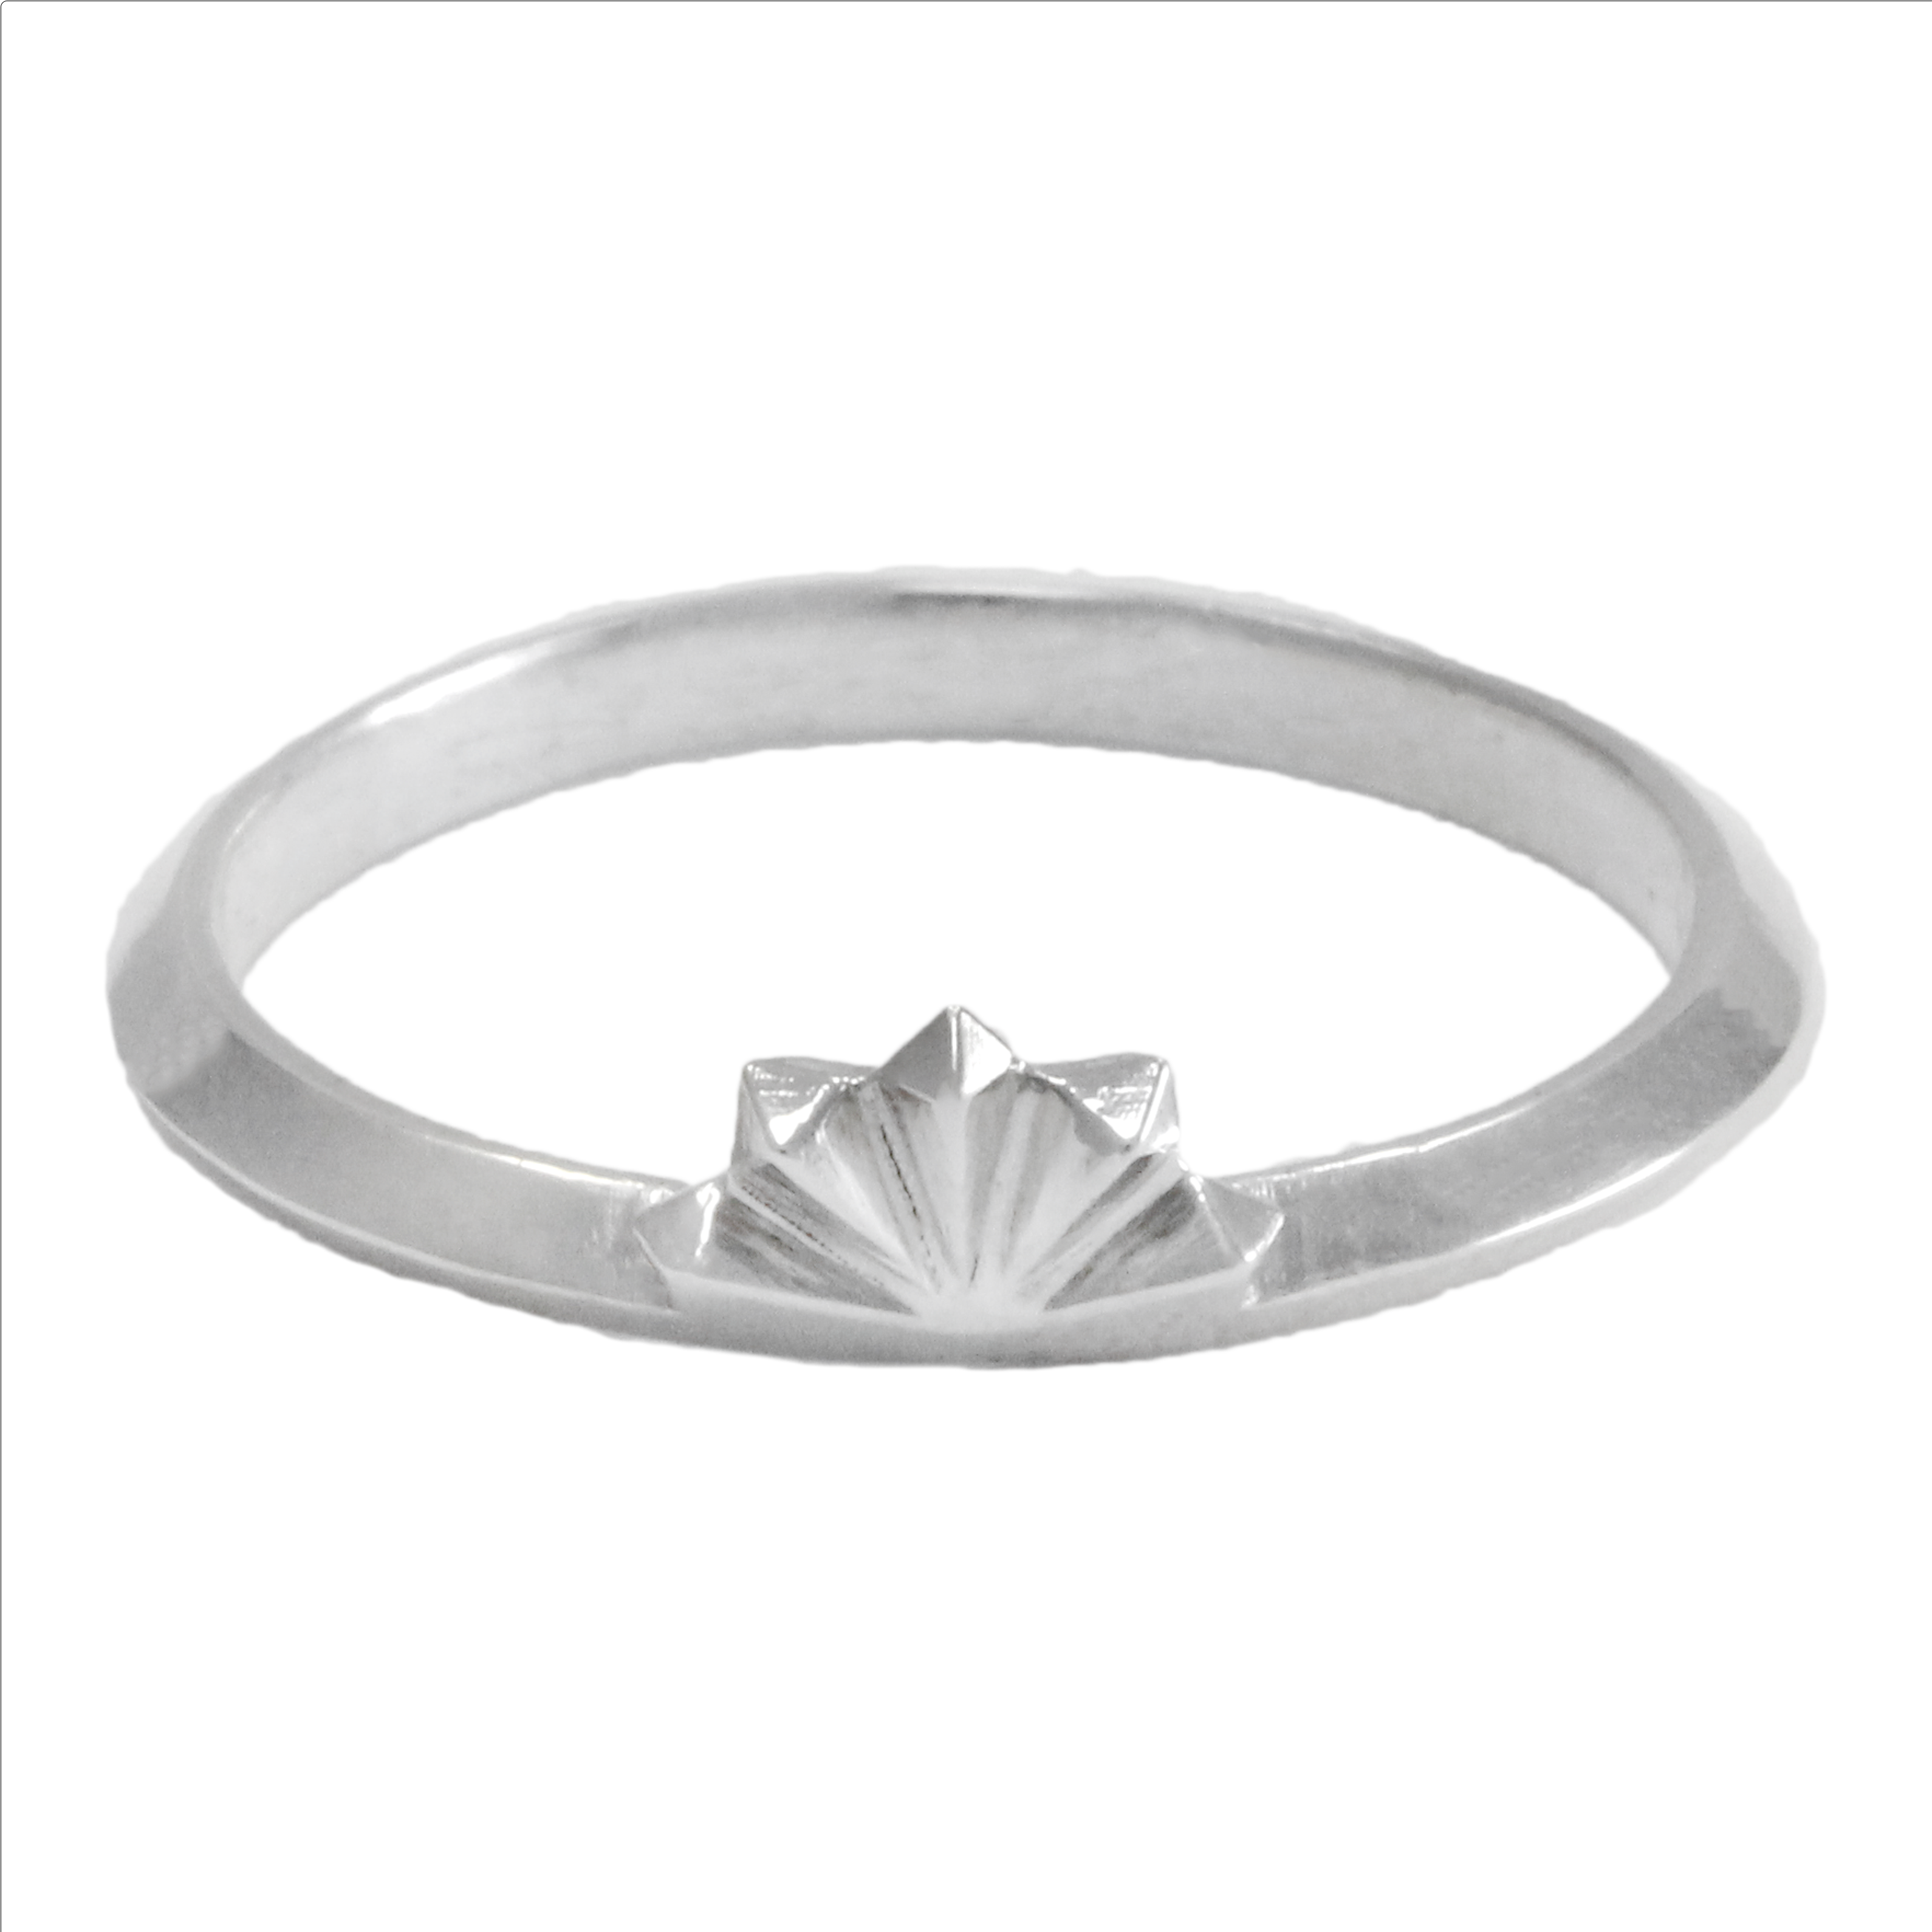 Dainty Stackable Pyramid Fan Ring on white background